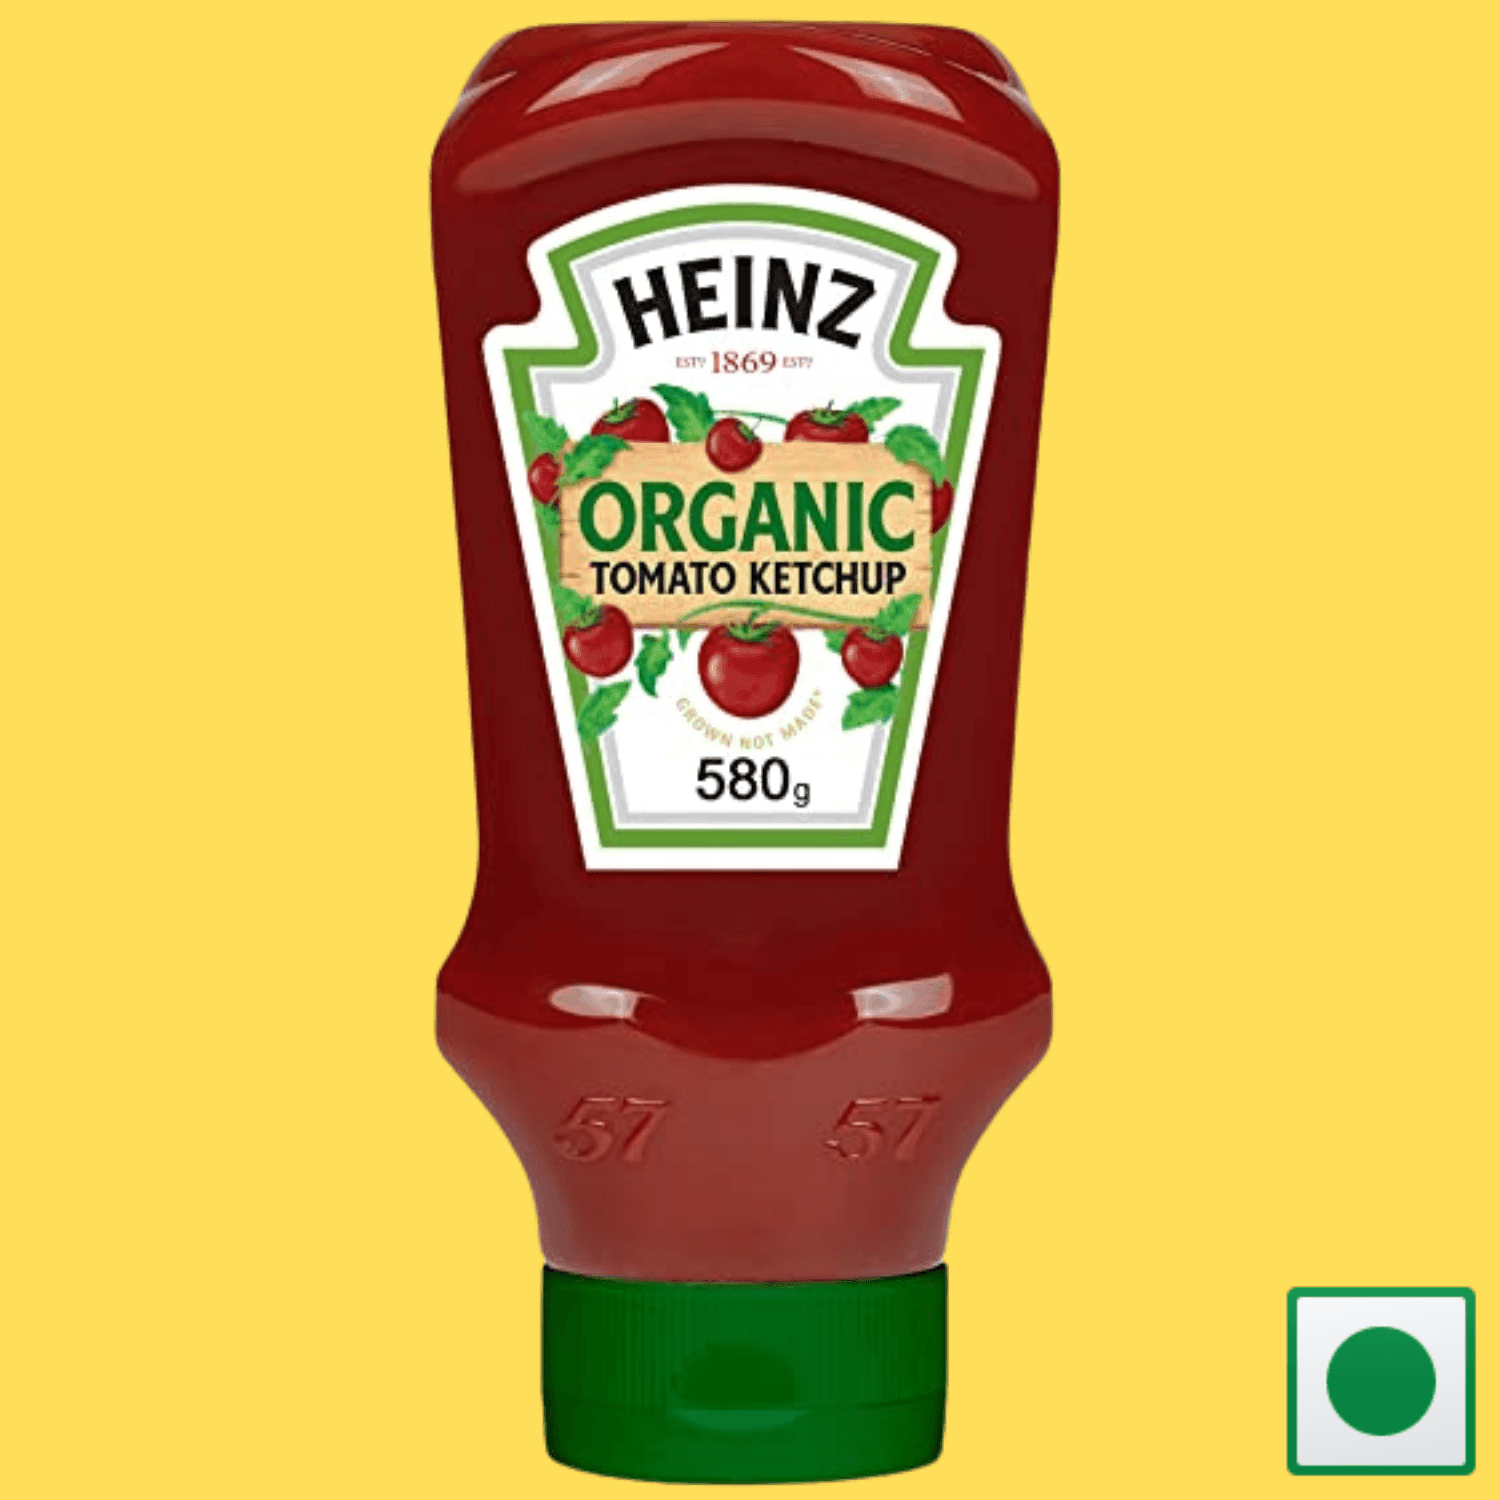 Heinz Organic Tomato Ketchup, 580 g (Imported) - Super 7 Mart